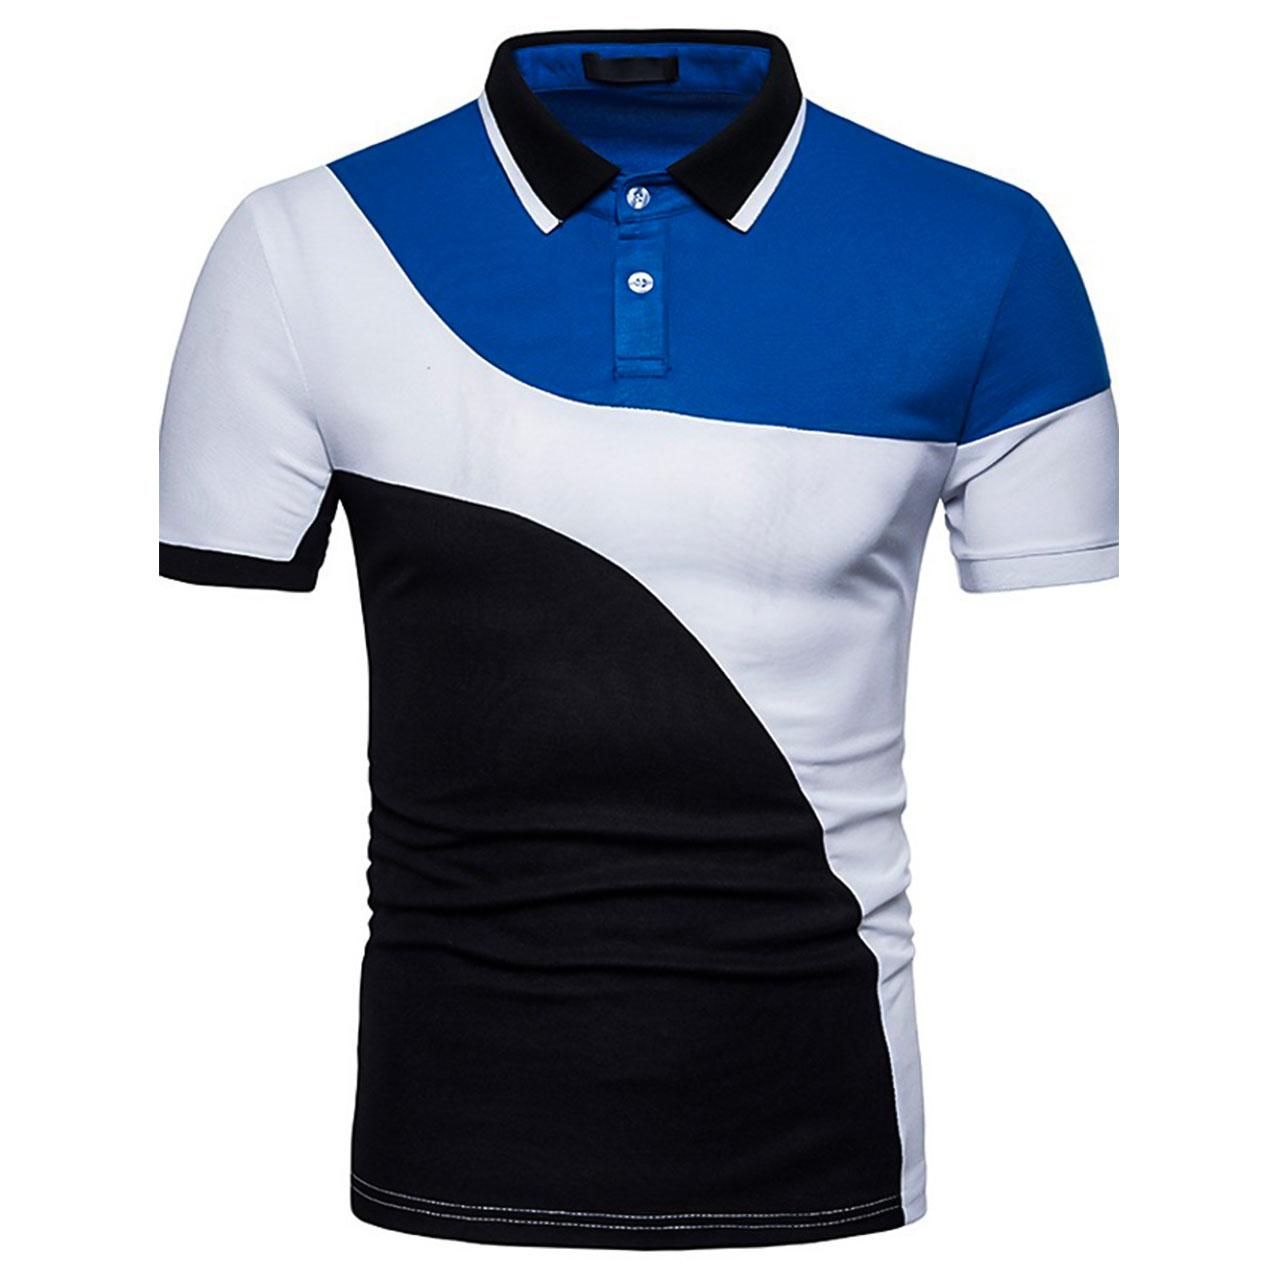 BEST MEN'S DESIGNER POLO SHIRTS TO MASTER THE SMART CASUAL LOOK